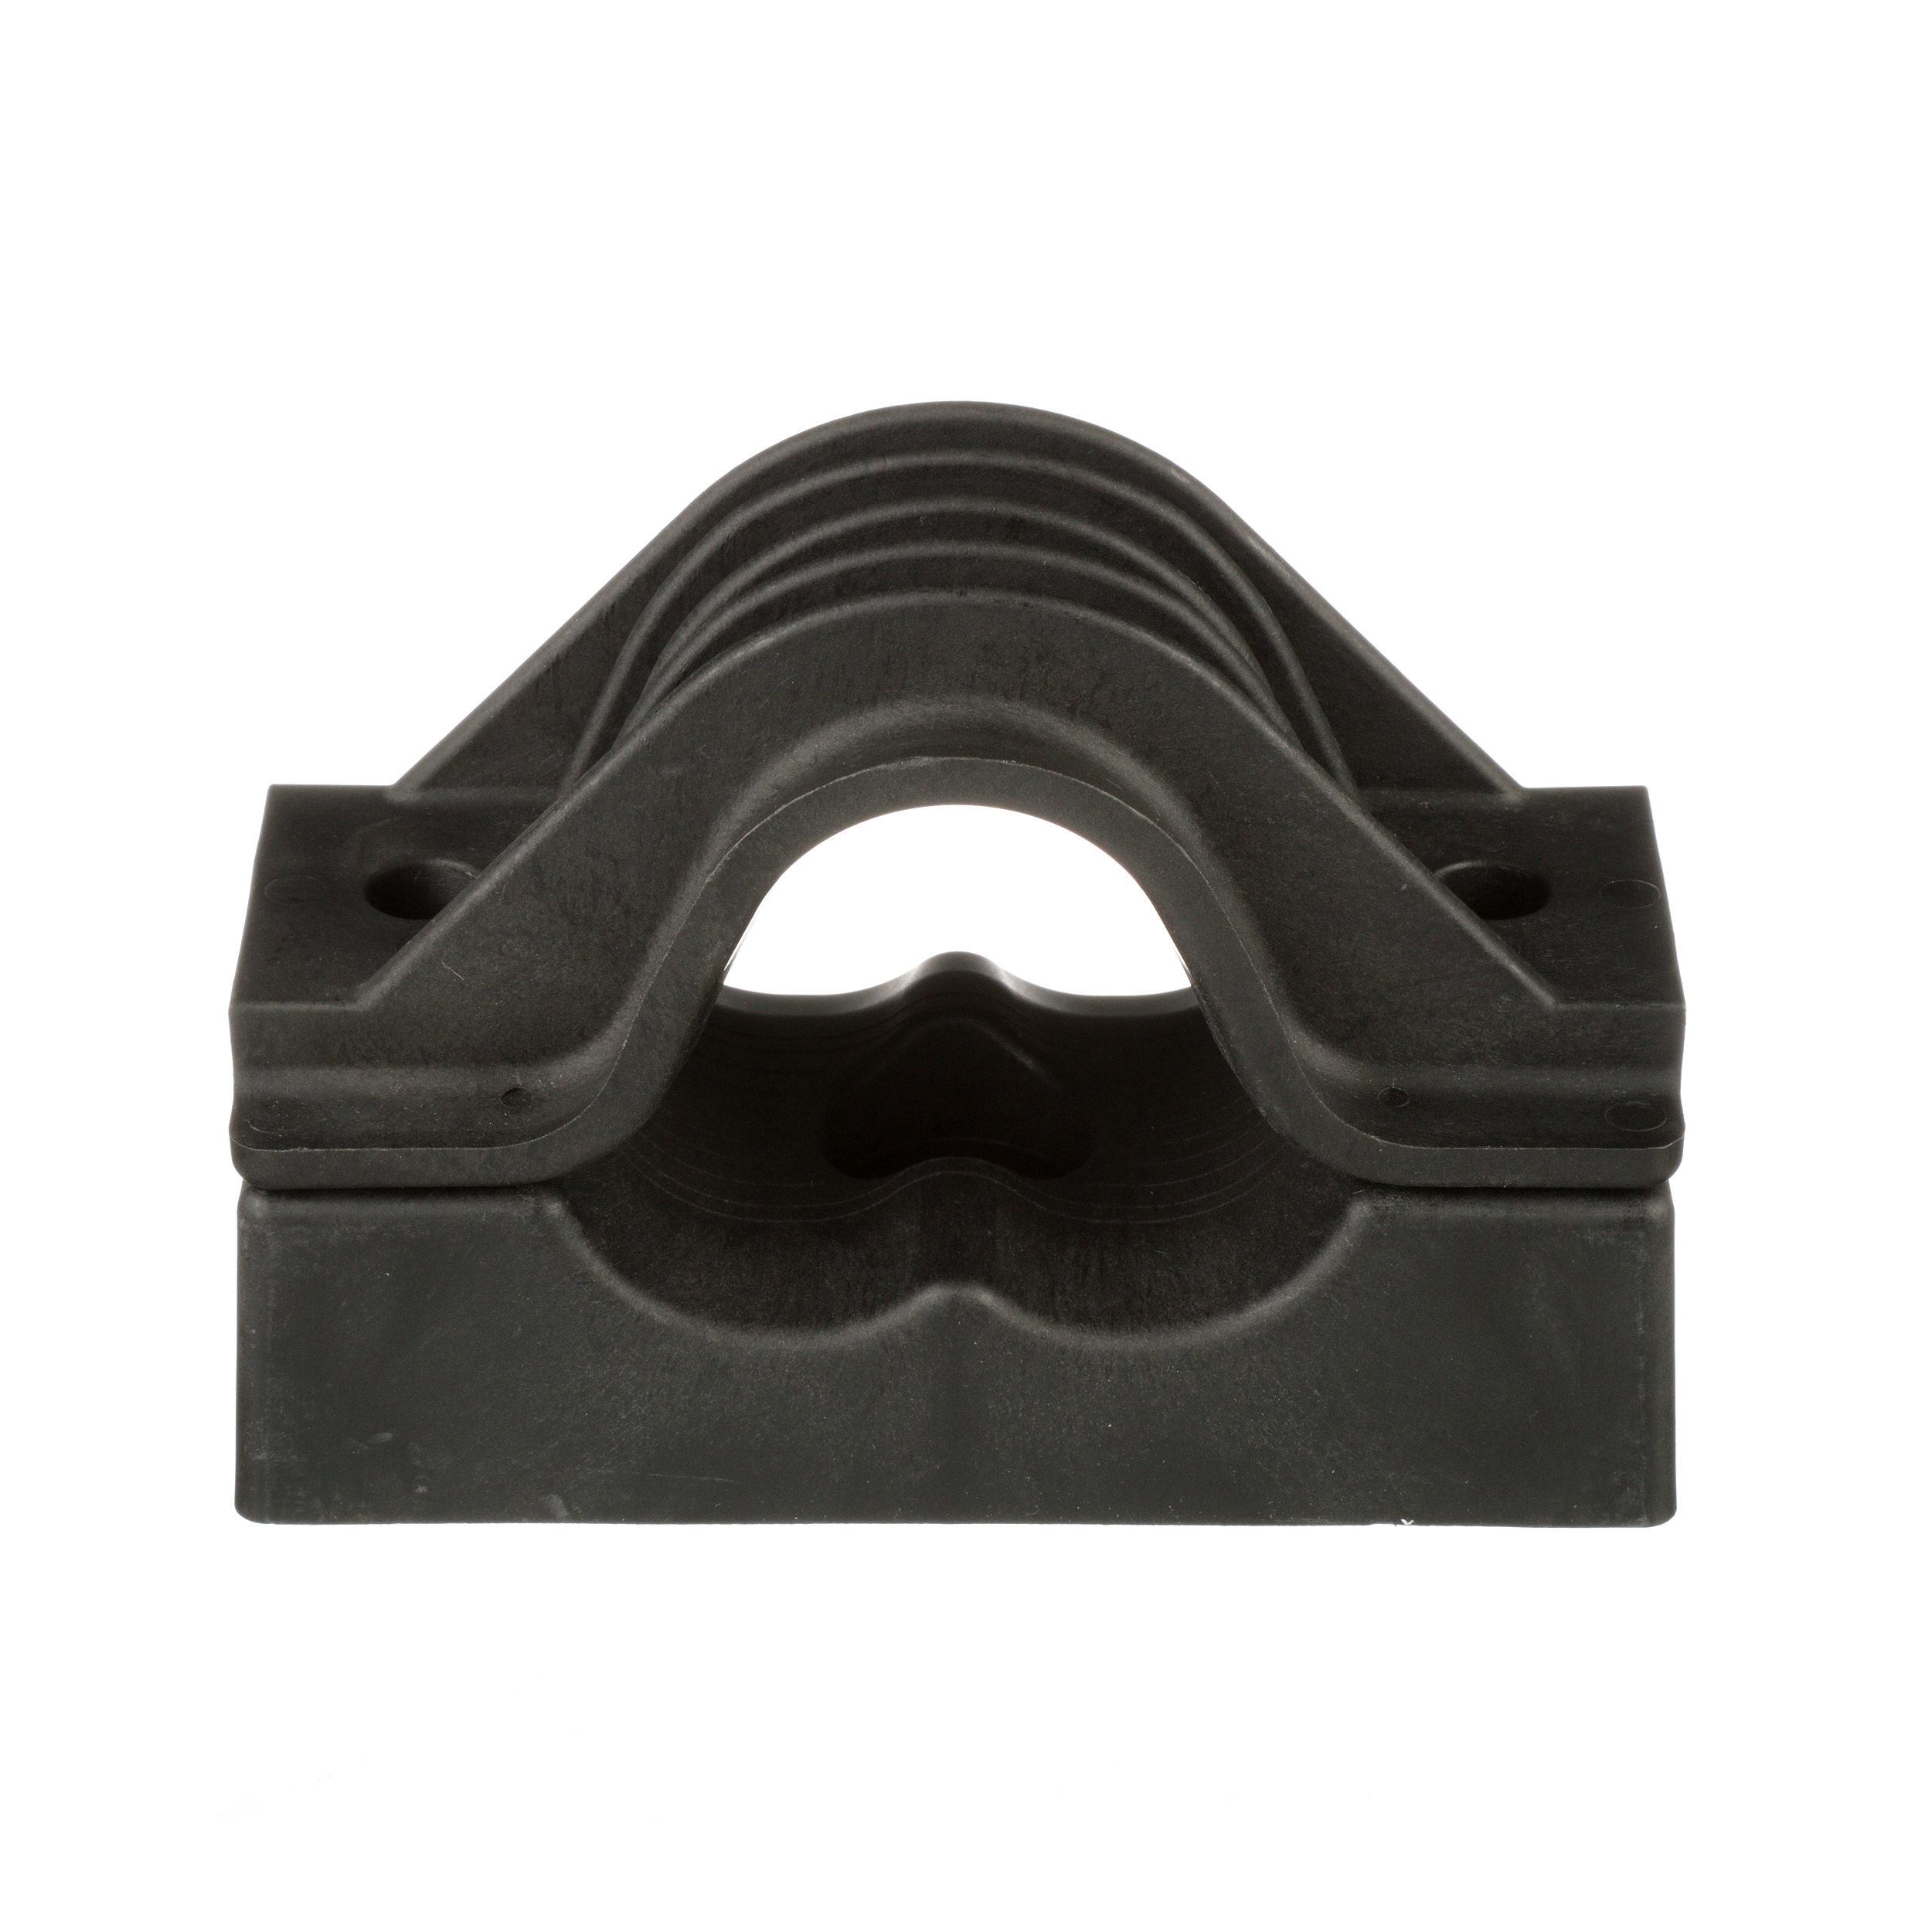 CCPLTR3139-X Cable Cleat, TR Clamp Type, PL, Trefoil, 1.22-1.54in OD, PK10